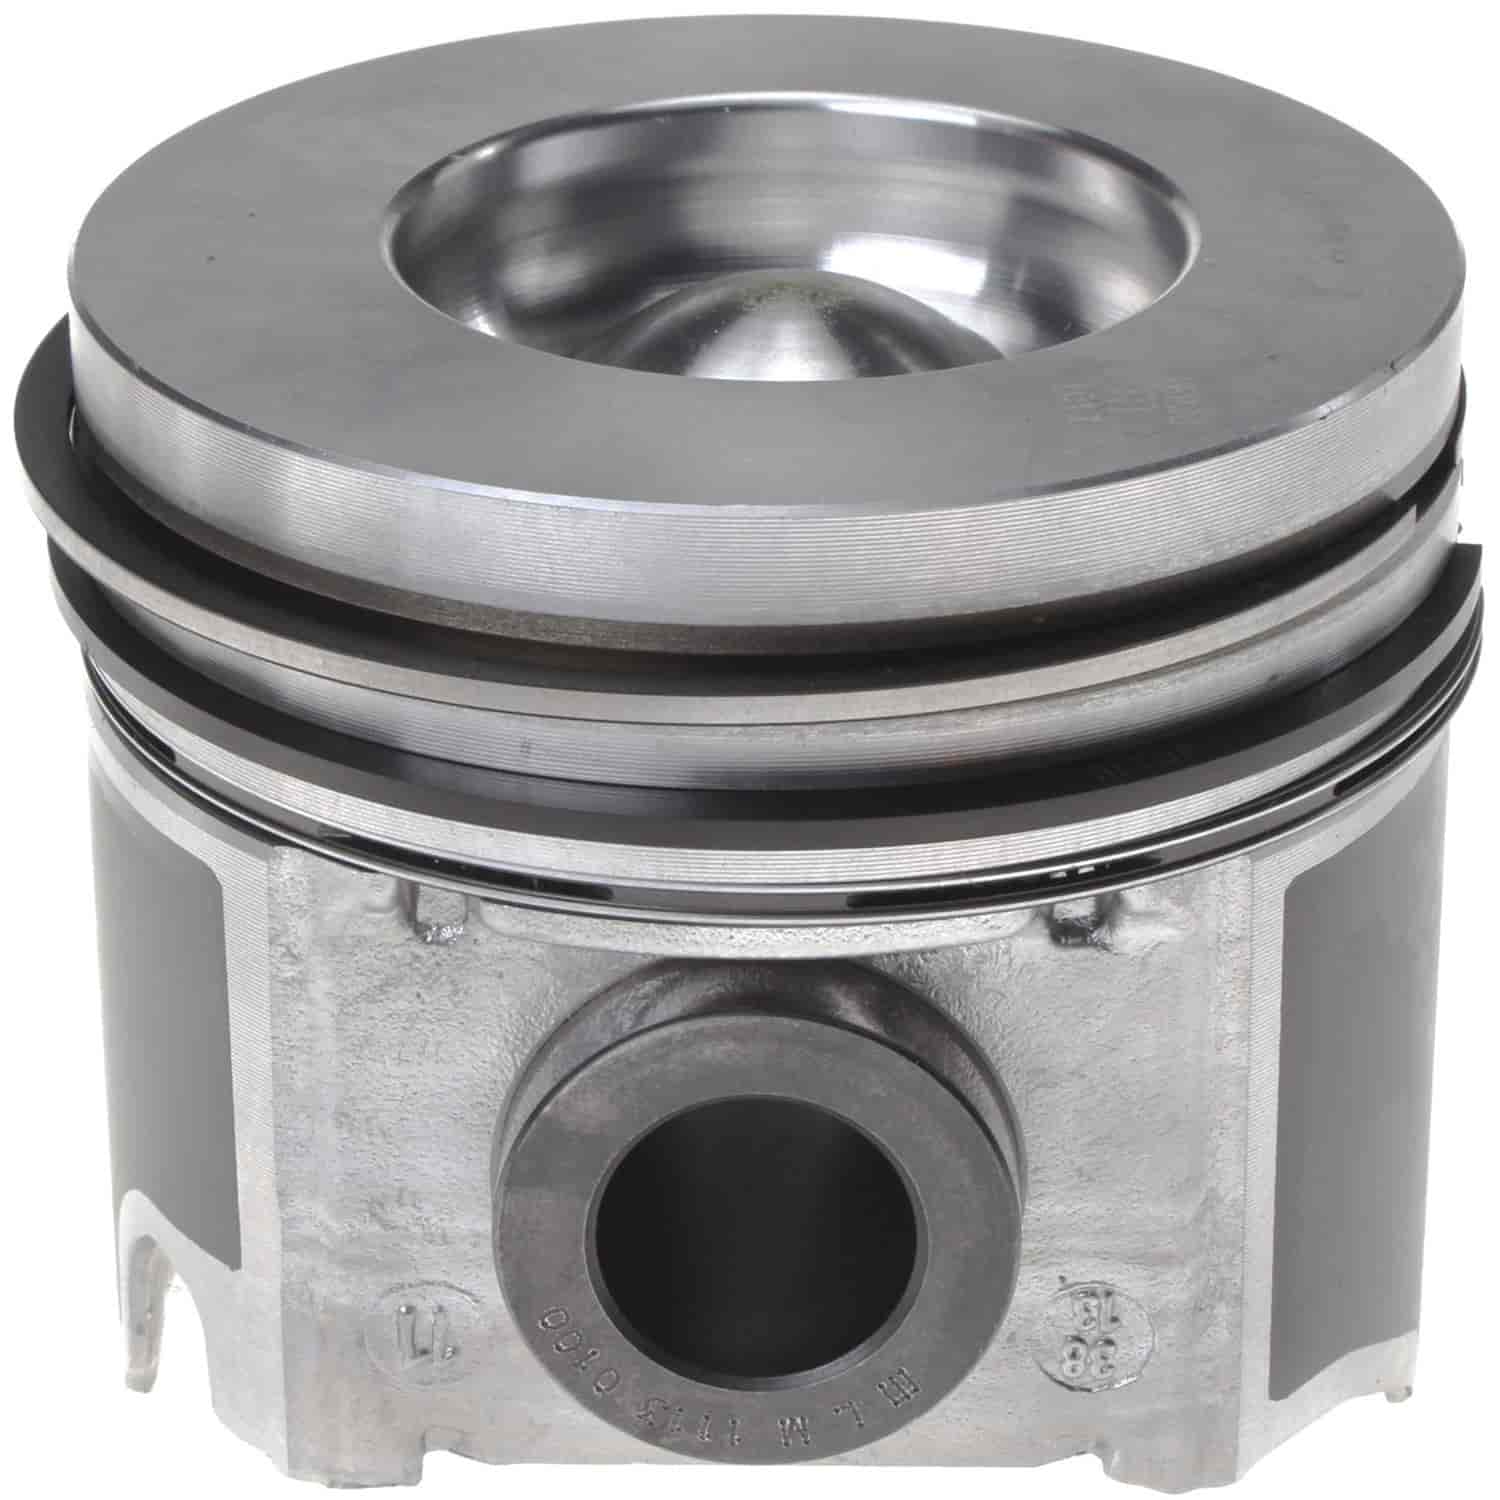 Piston and Rings Set 2003 Ford/Navistar Powerstroke Diesel V8 6.0L with 3.78" Bore (+.040")